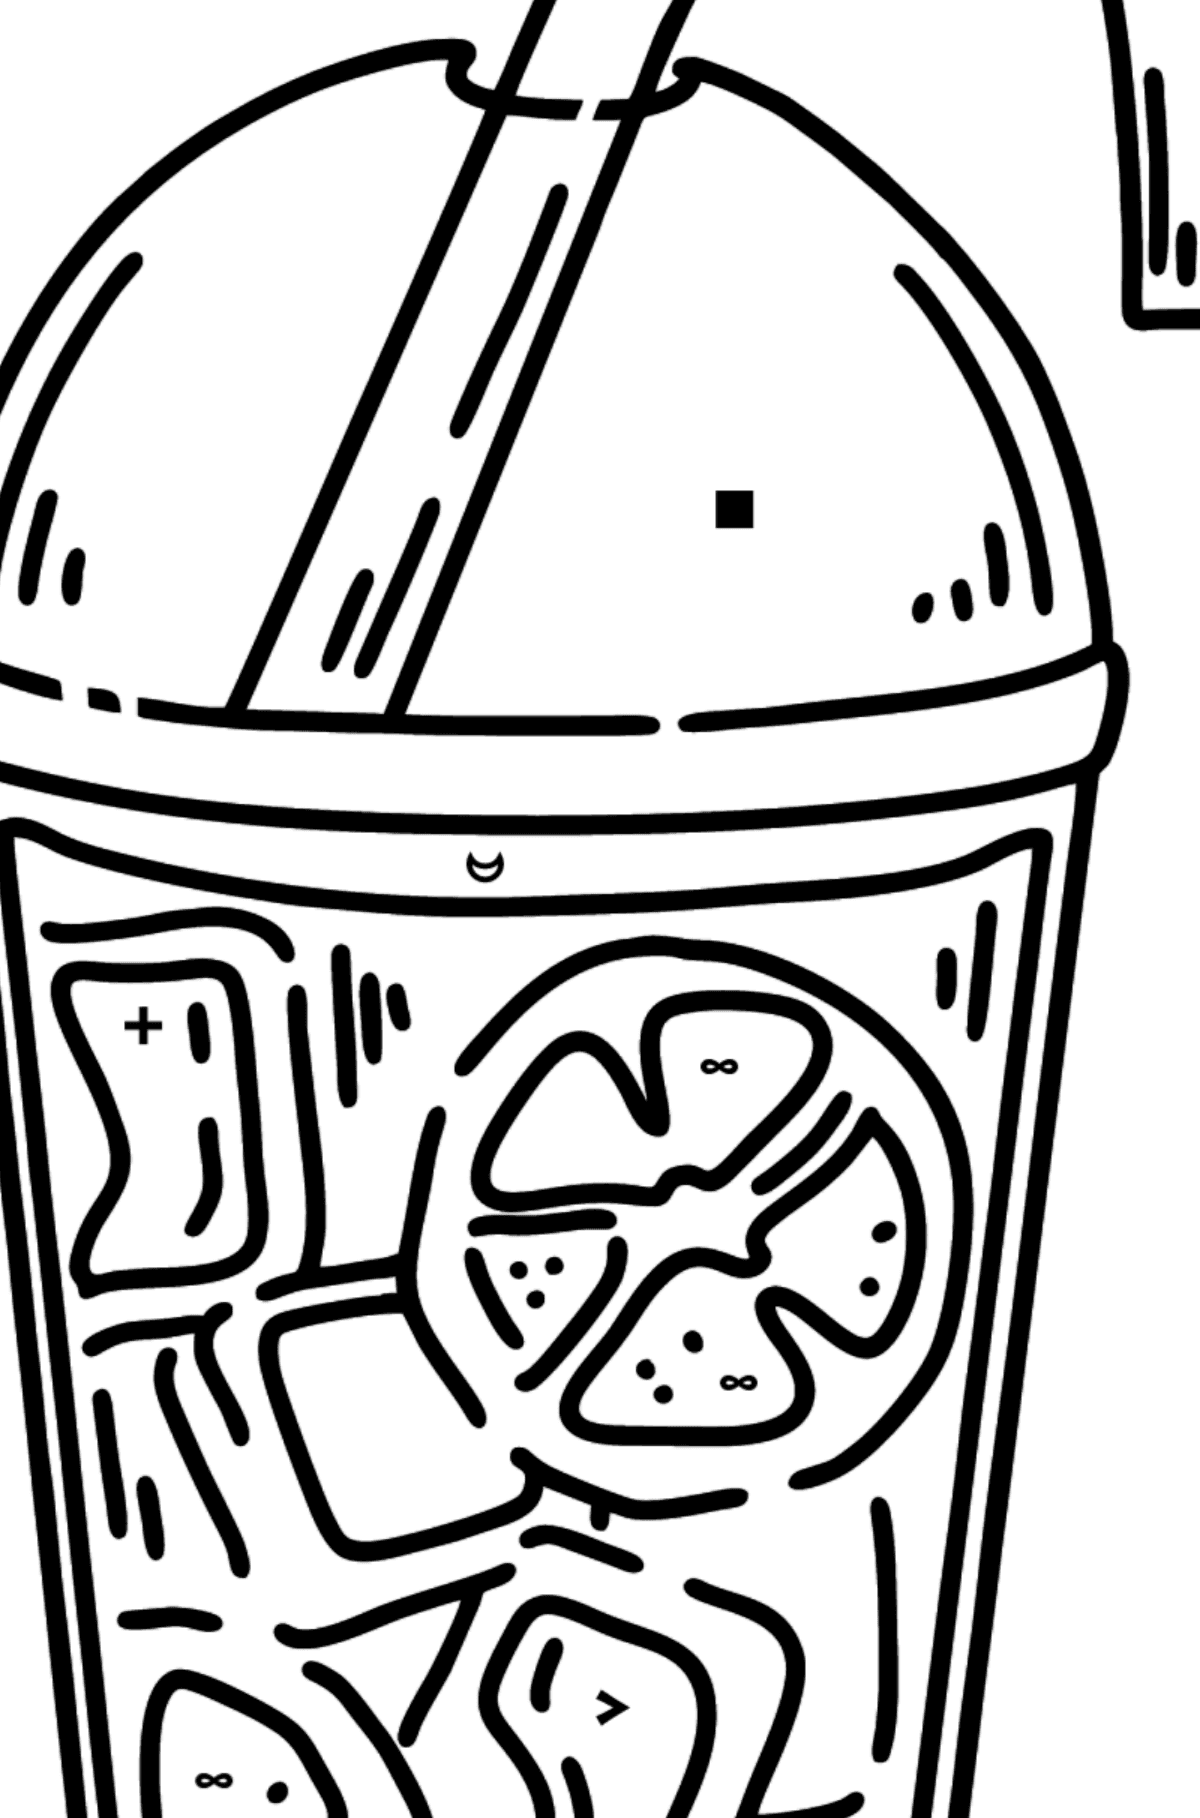 Lemonade in a Glass coloring page - Coloring by Symbols for Kids